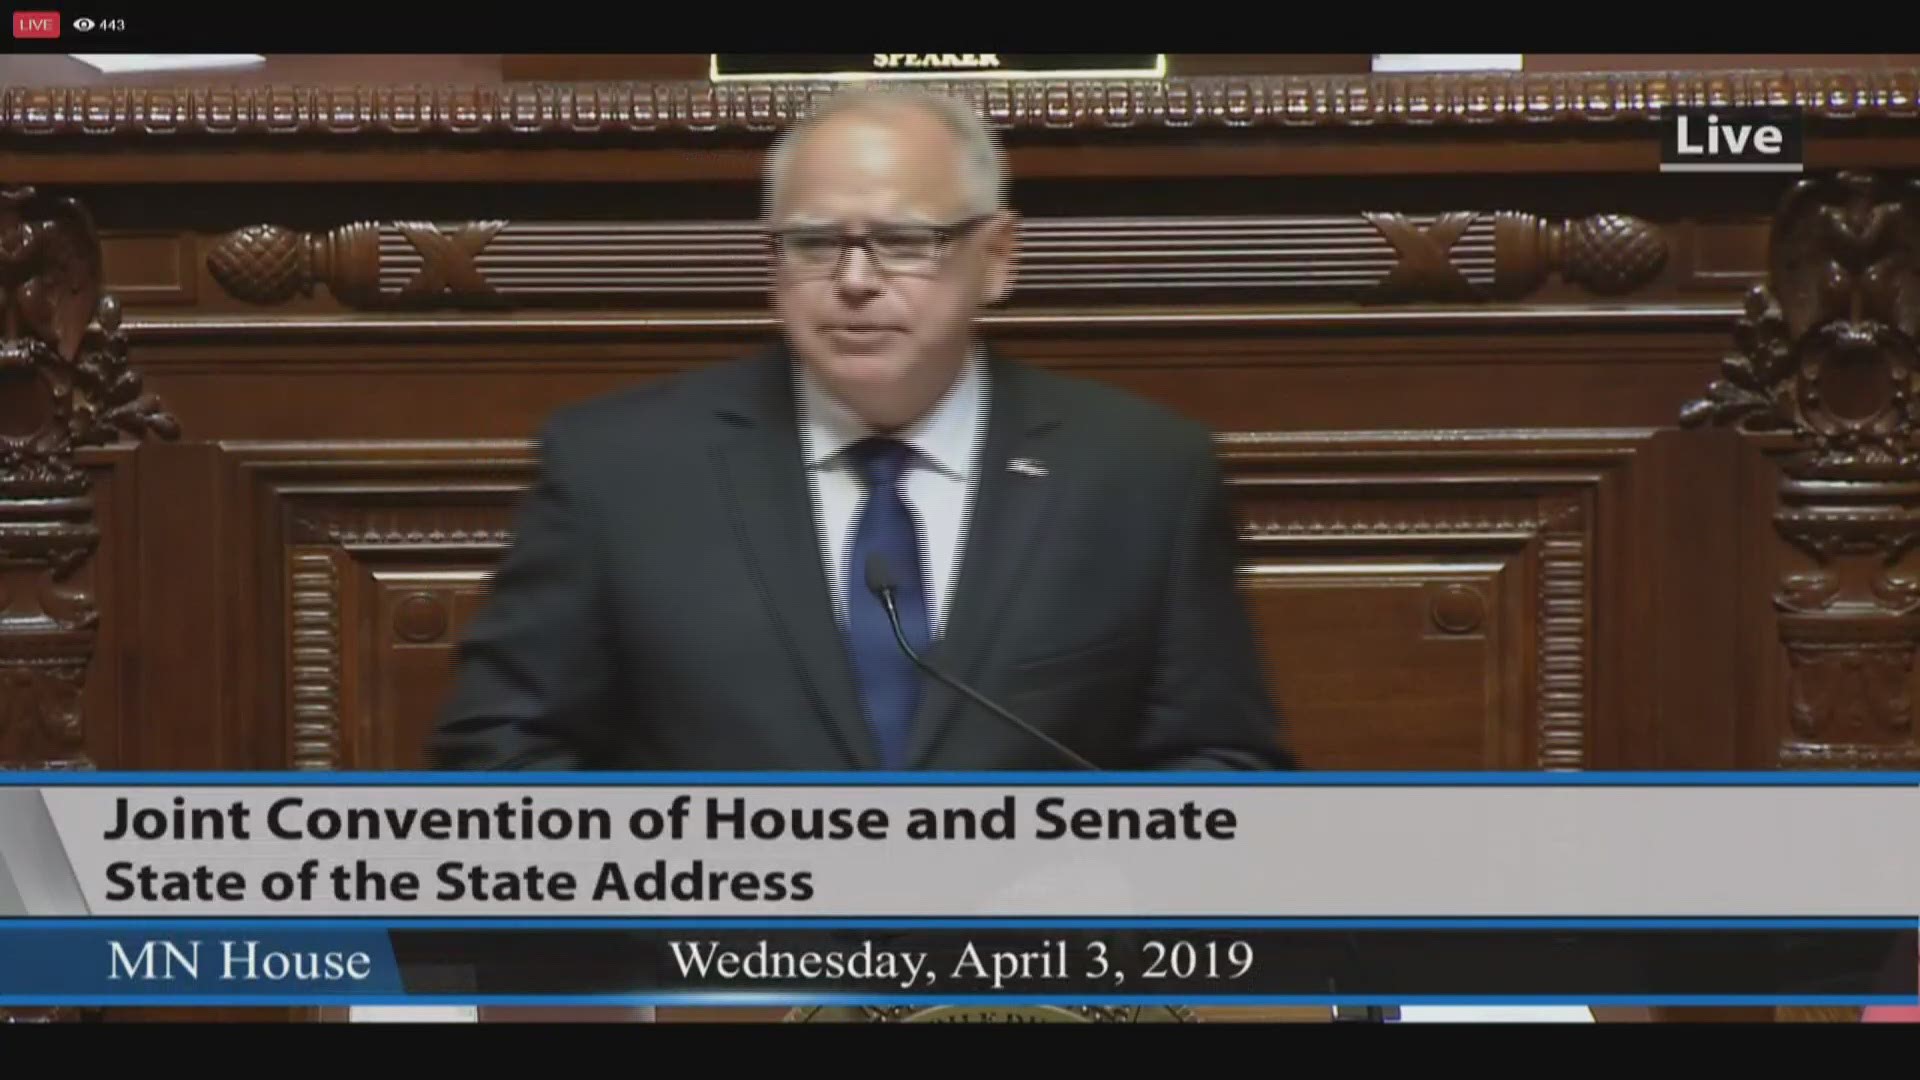 Gov. Tim Walz calls on Minnesota to write a new story about how a government divided between Democrats and Republicans puts aside ideology and comes together for the good of the people. https://kare11.tv/2IclFTw